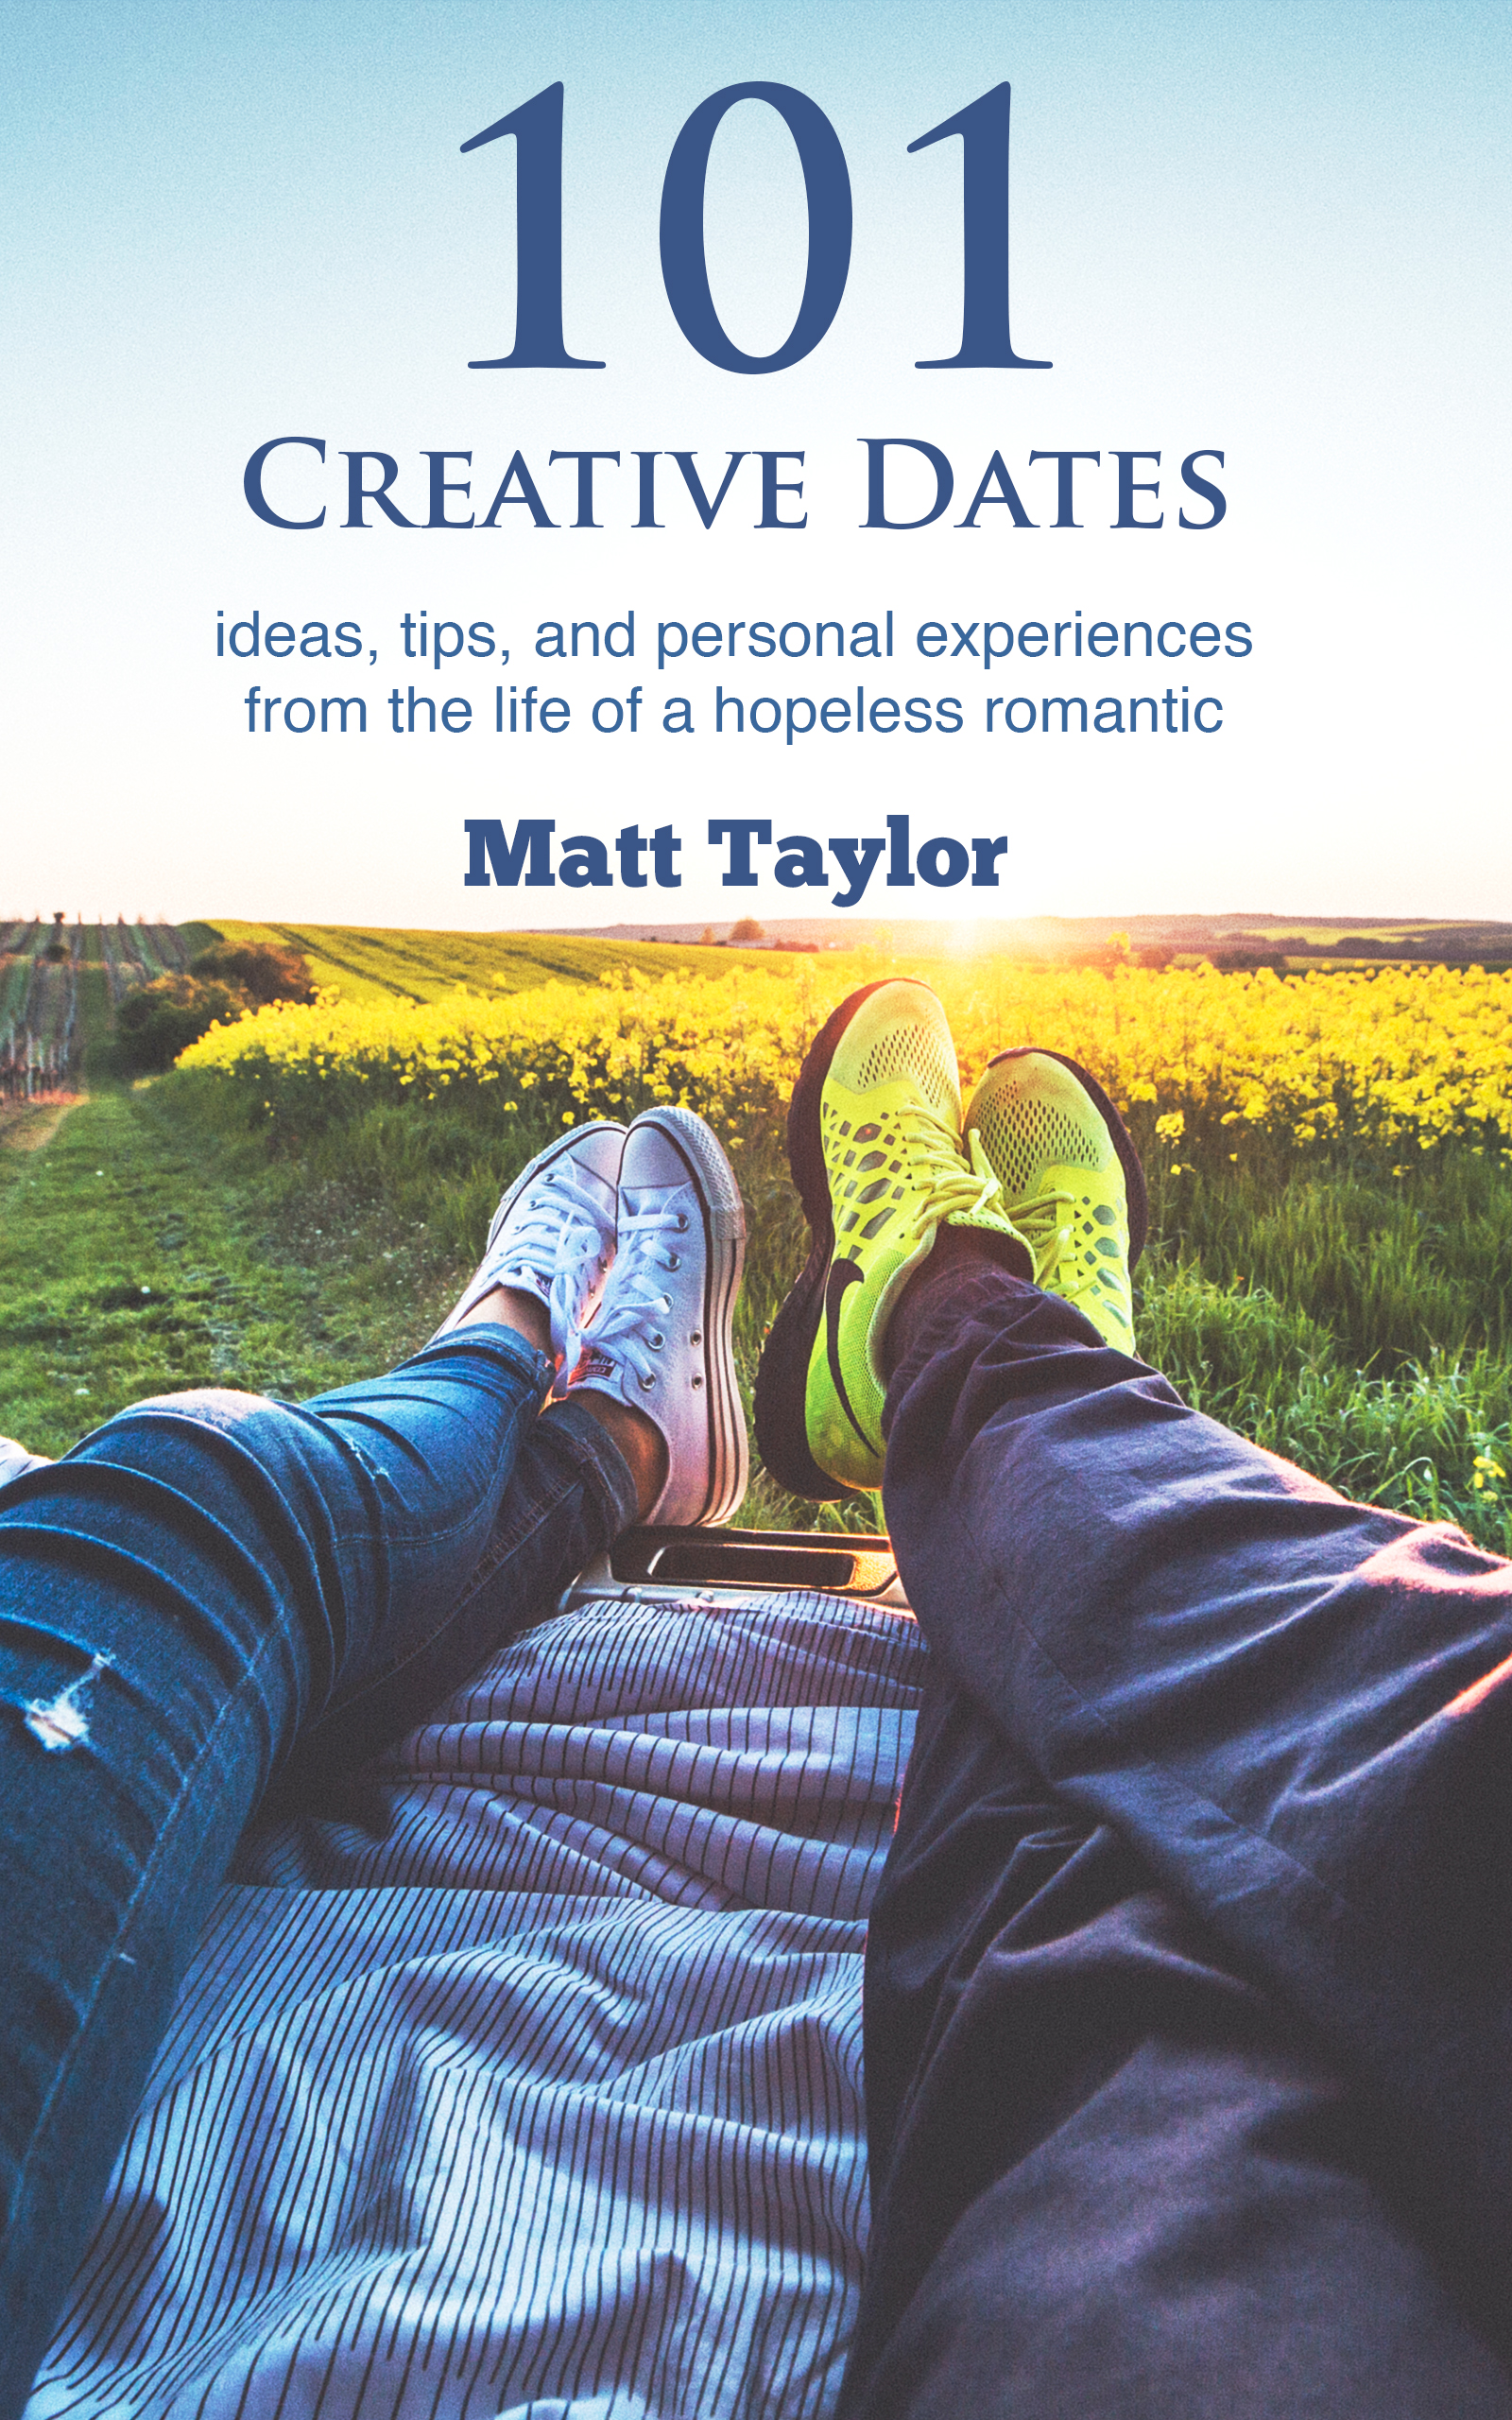 FREE: 101 Creative Dates: ideas, tips, and personal experiences from the life of a hopeless romantic by Matt Taylor